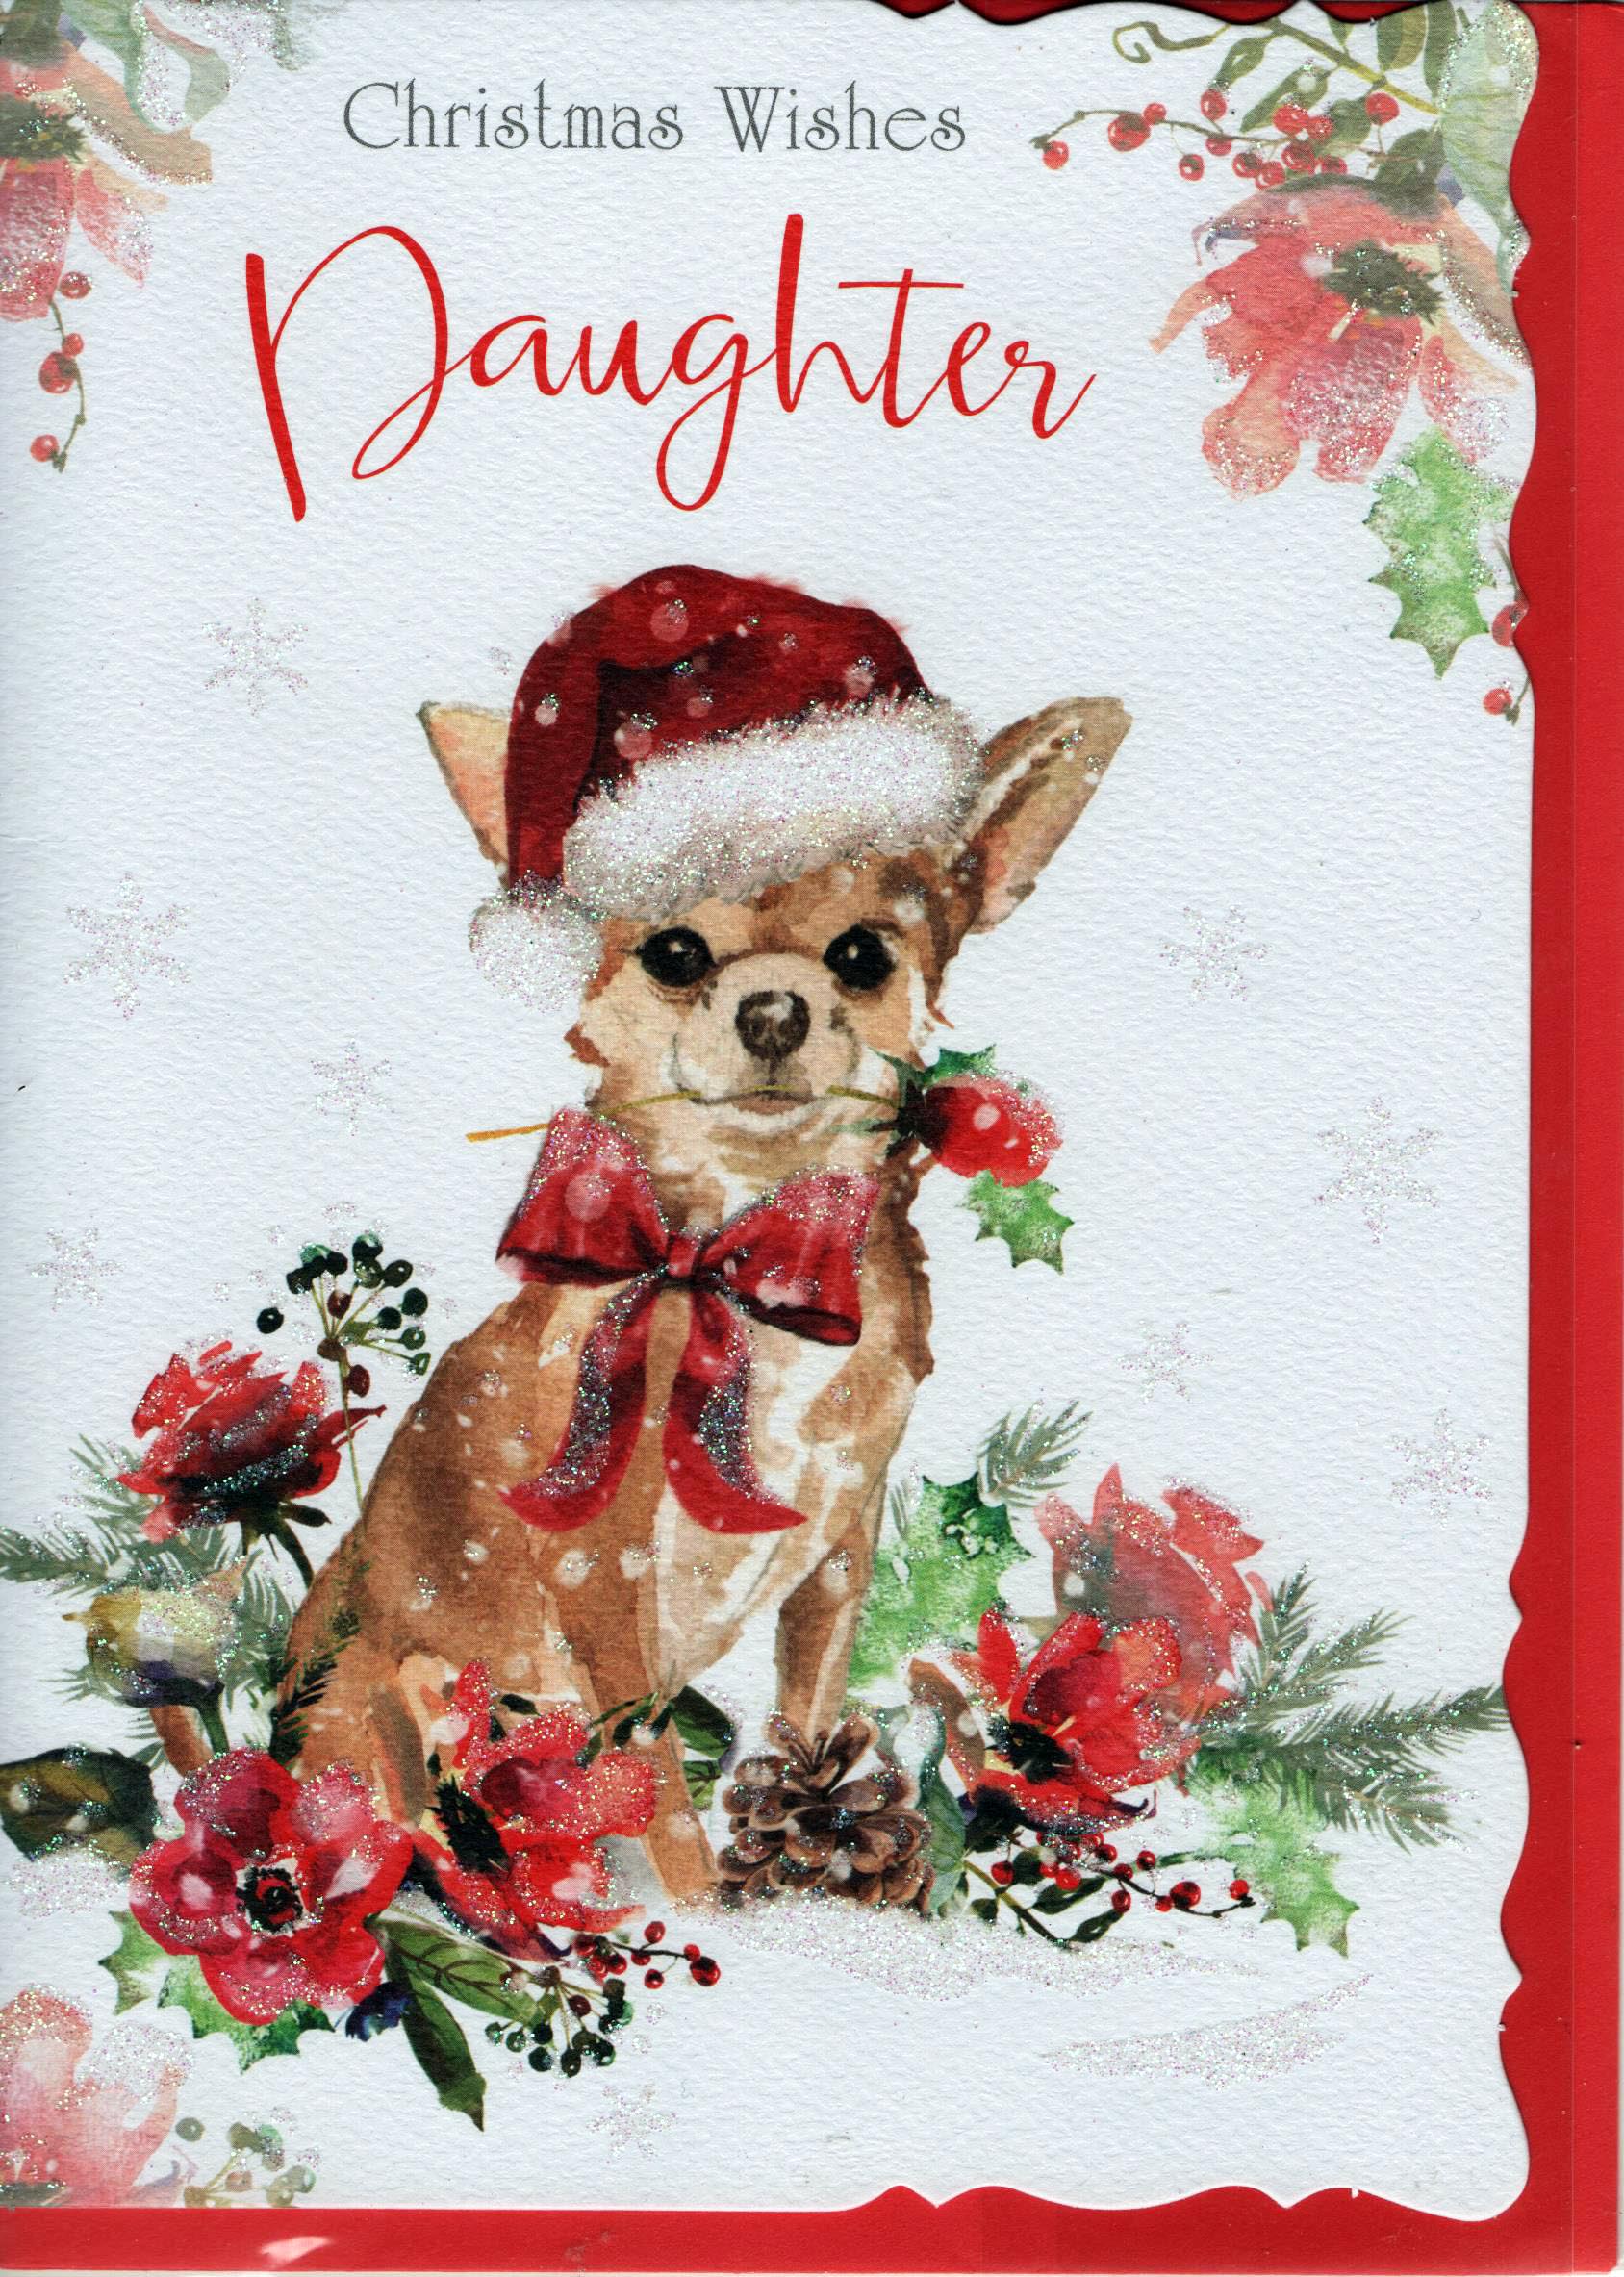 Christmas Wishes Daughter Greeting Card